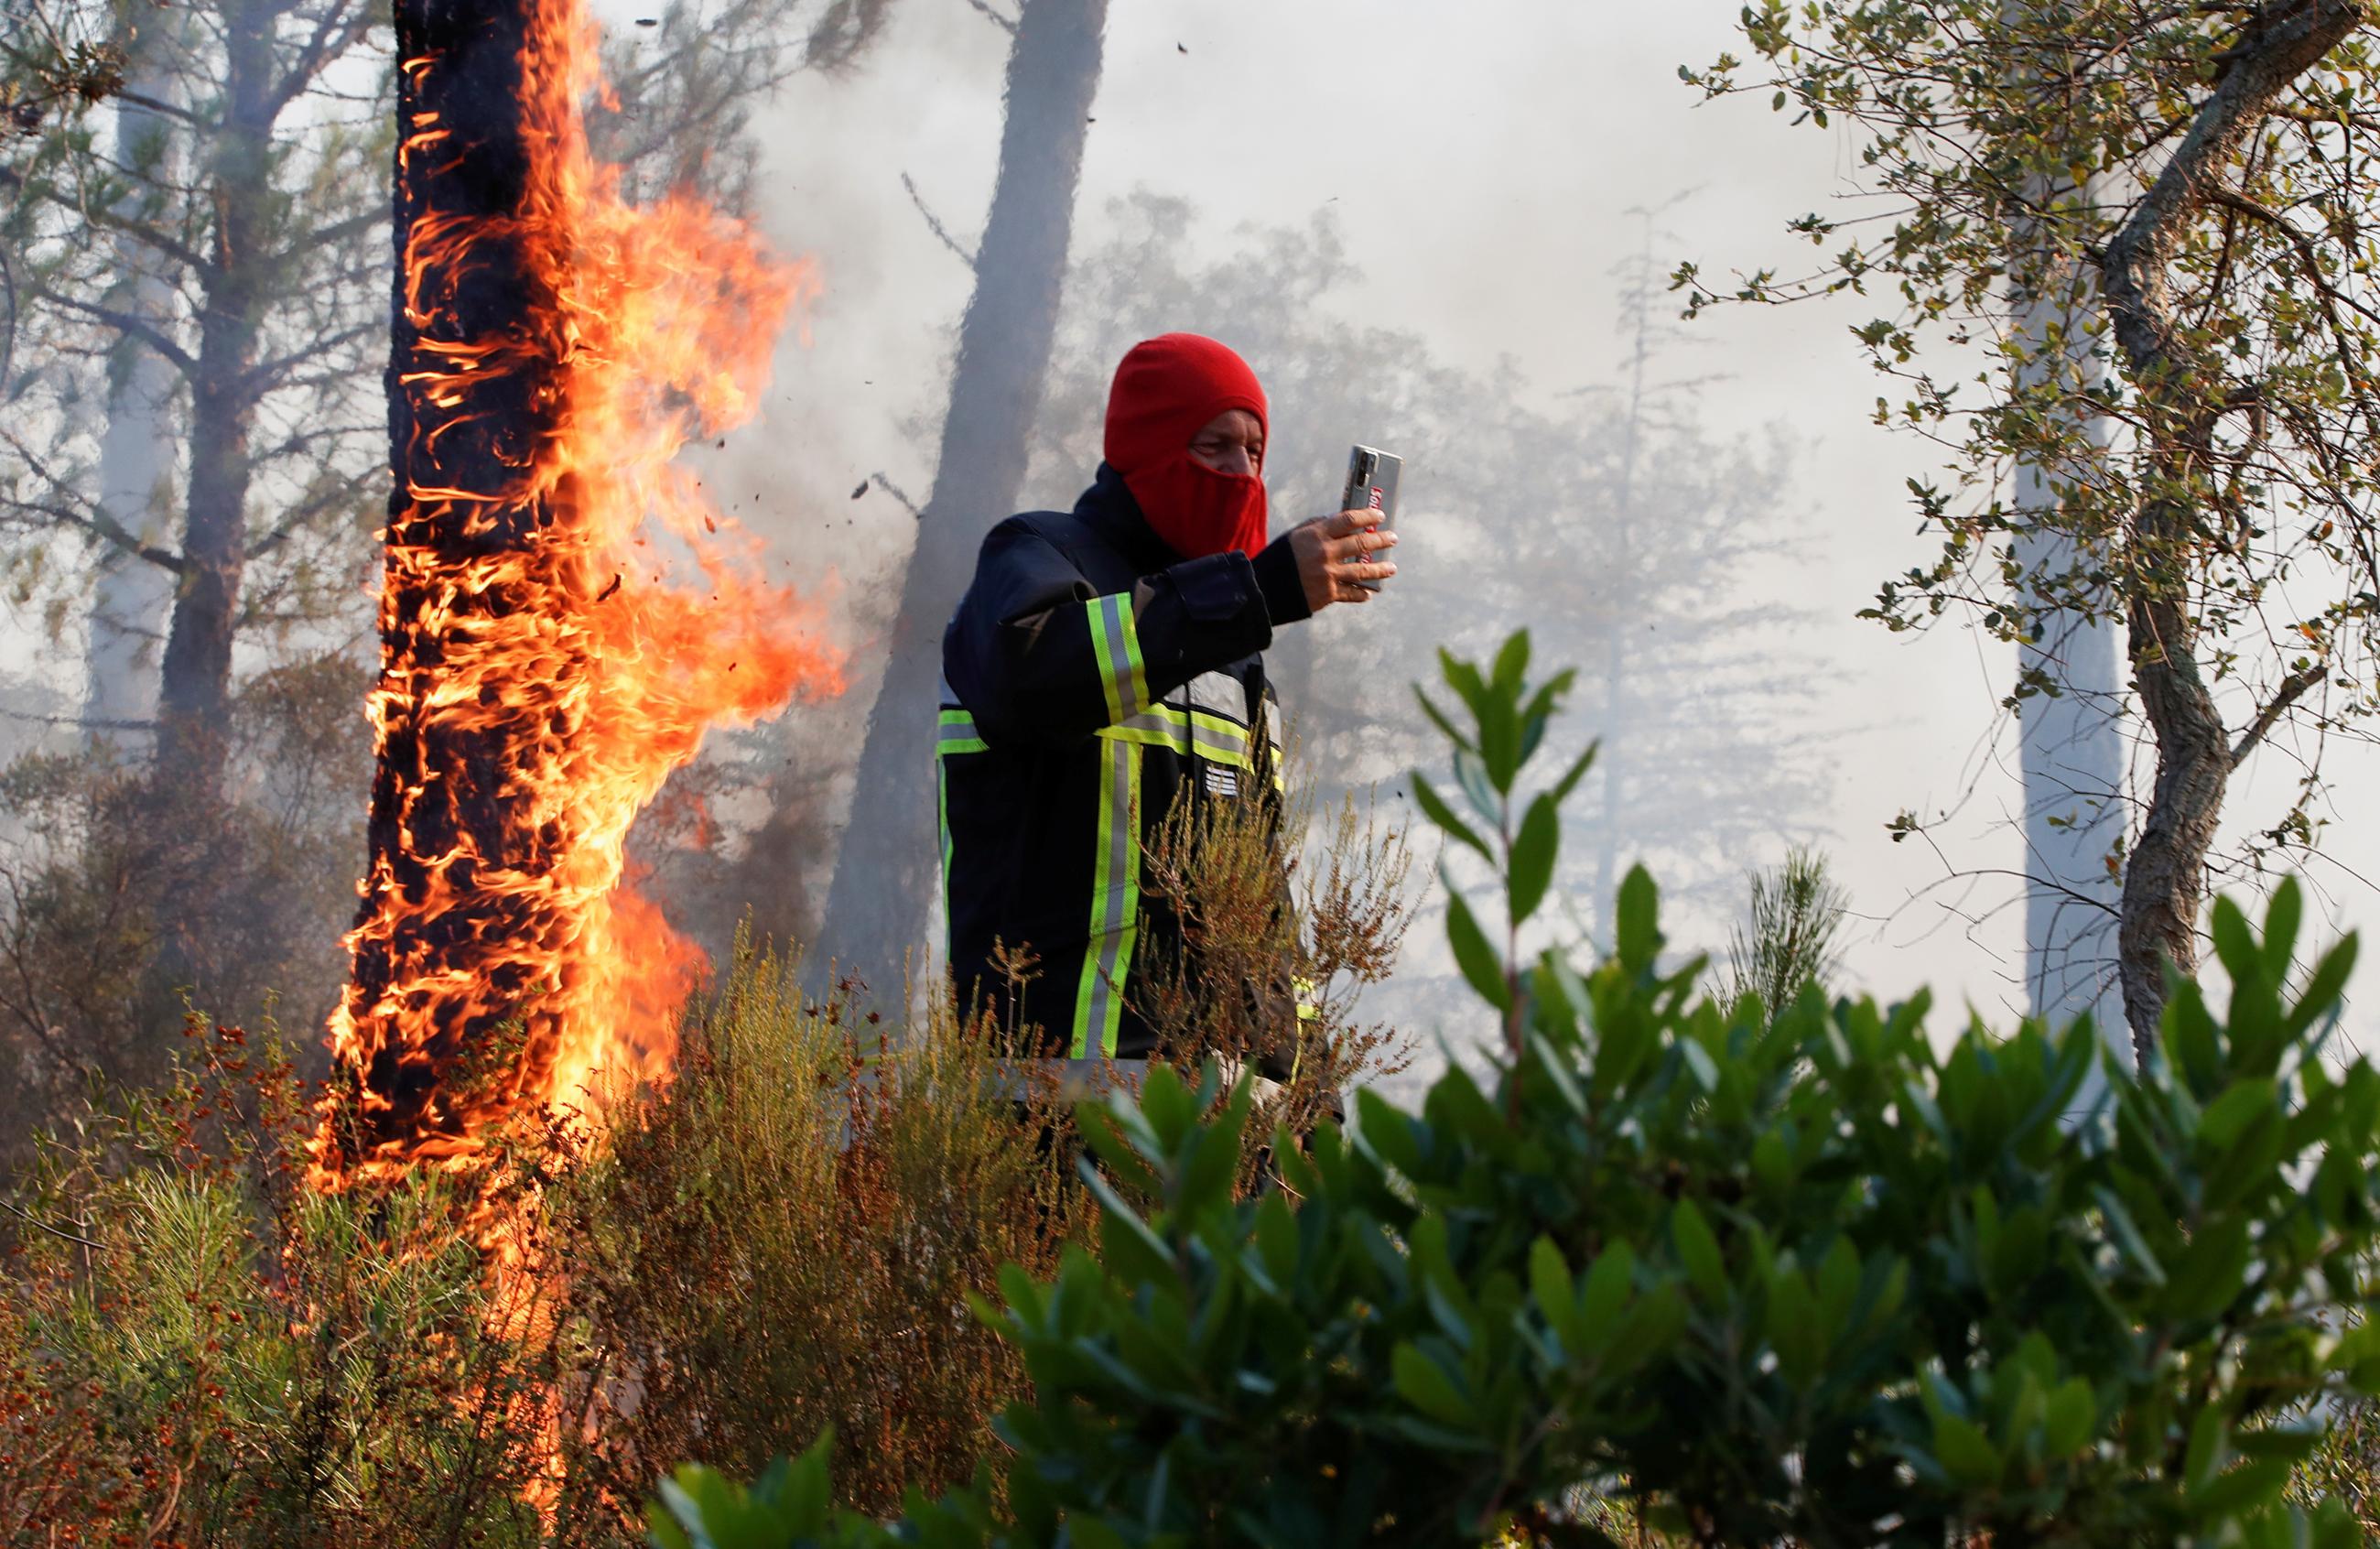 A firefighter takes a picture of a fire during a major wildfire that broke out in Vidauban, in the Var region of southern France, on August 18, 2021